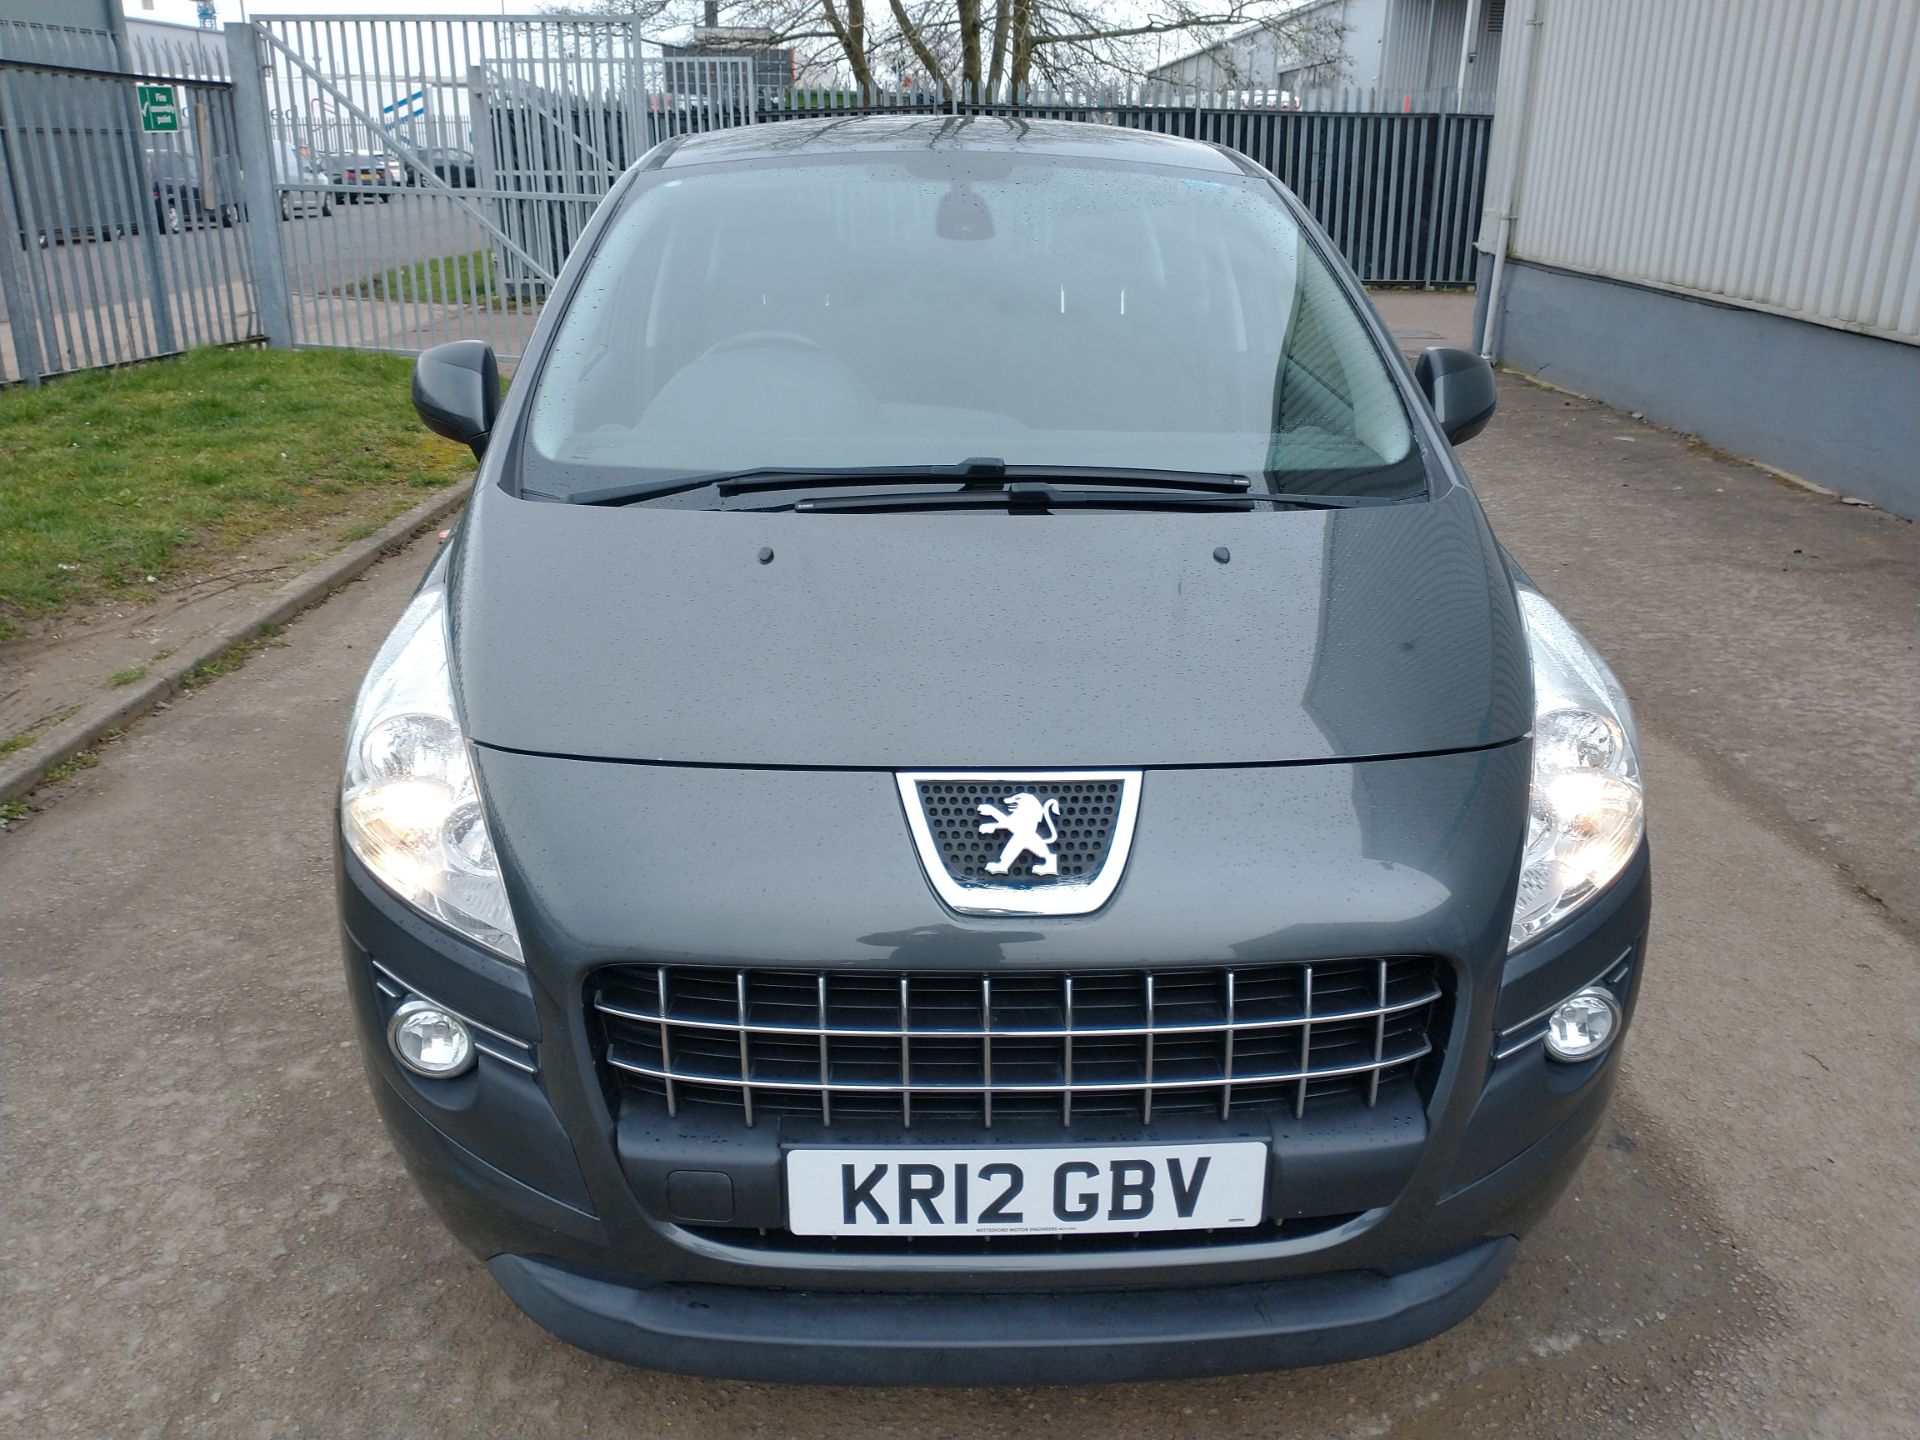 2012 Peugeot 3008 Active HDI 1.6 5DR SUV - CL505 - NO VAT ON THE HAMM - Image 13 of 19